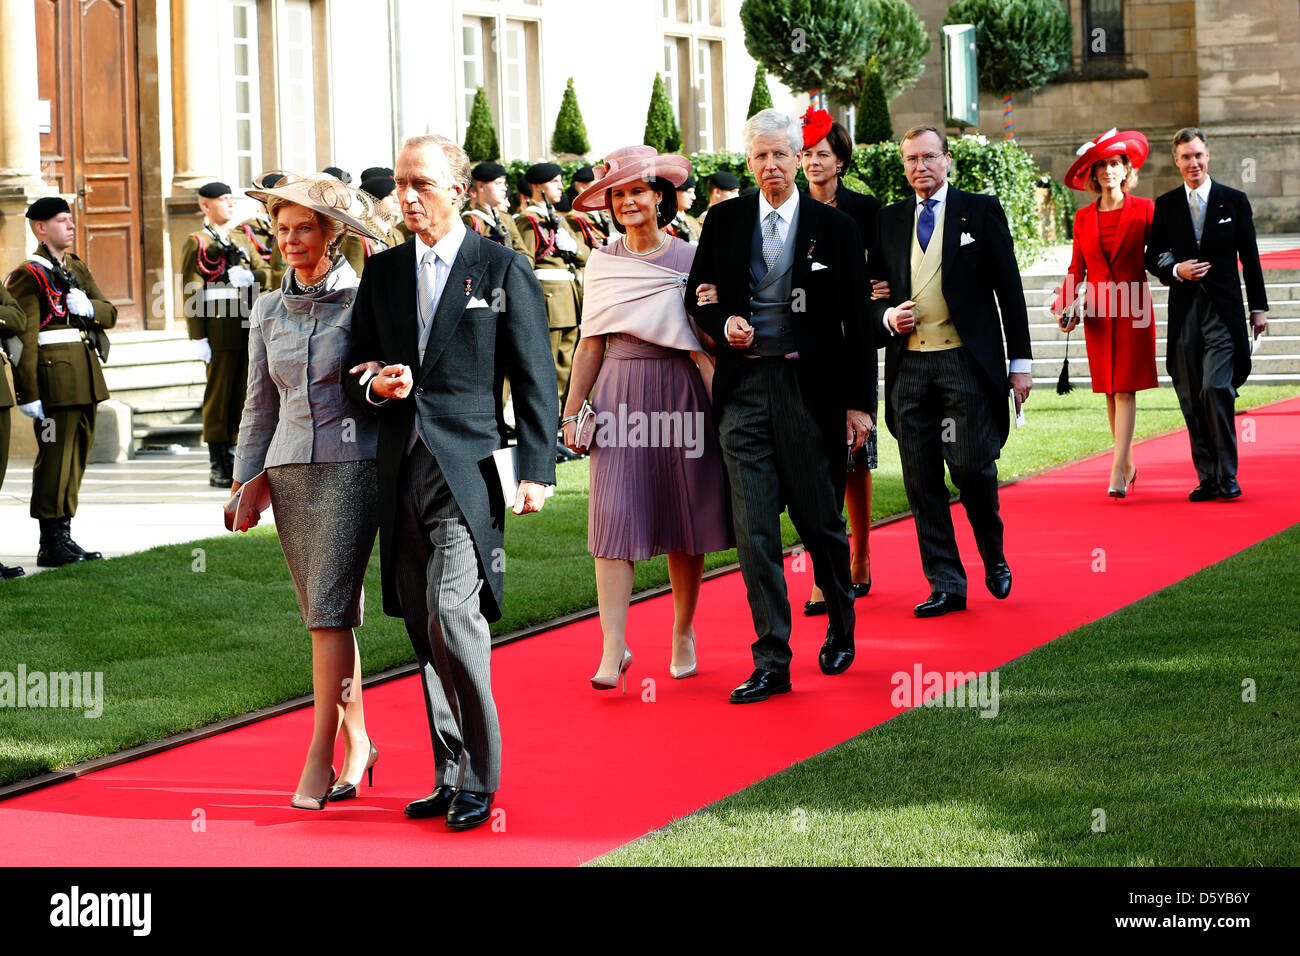 All brothers and sisters of Grand Duke Henri of Luxembourg: Princess Marie Astrid and Archduke Carl Christian, Princess Margaretha and Prince Nicolas, Prince Jean and Diane De Guerre, Prince Guillaume and Princess Sibilla during the wedding of Prince Guillaume, the Hereditary Grand Duke of Luxembourg and Countess Stéphanie de Lannoy at the Cathedral of Our Lady in the City of Luxem Stock Photo